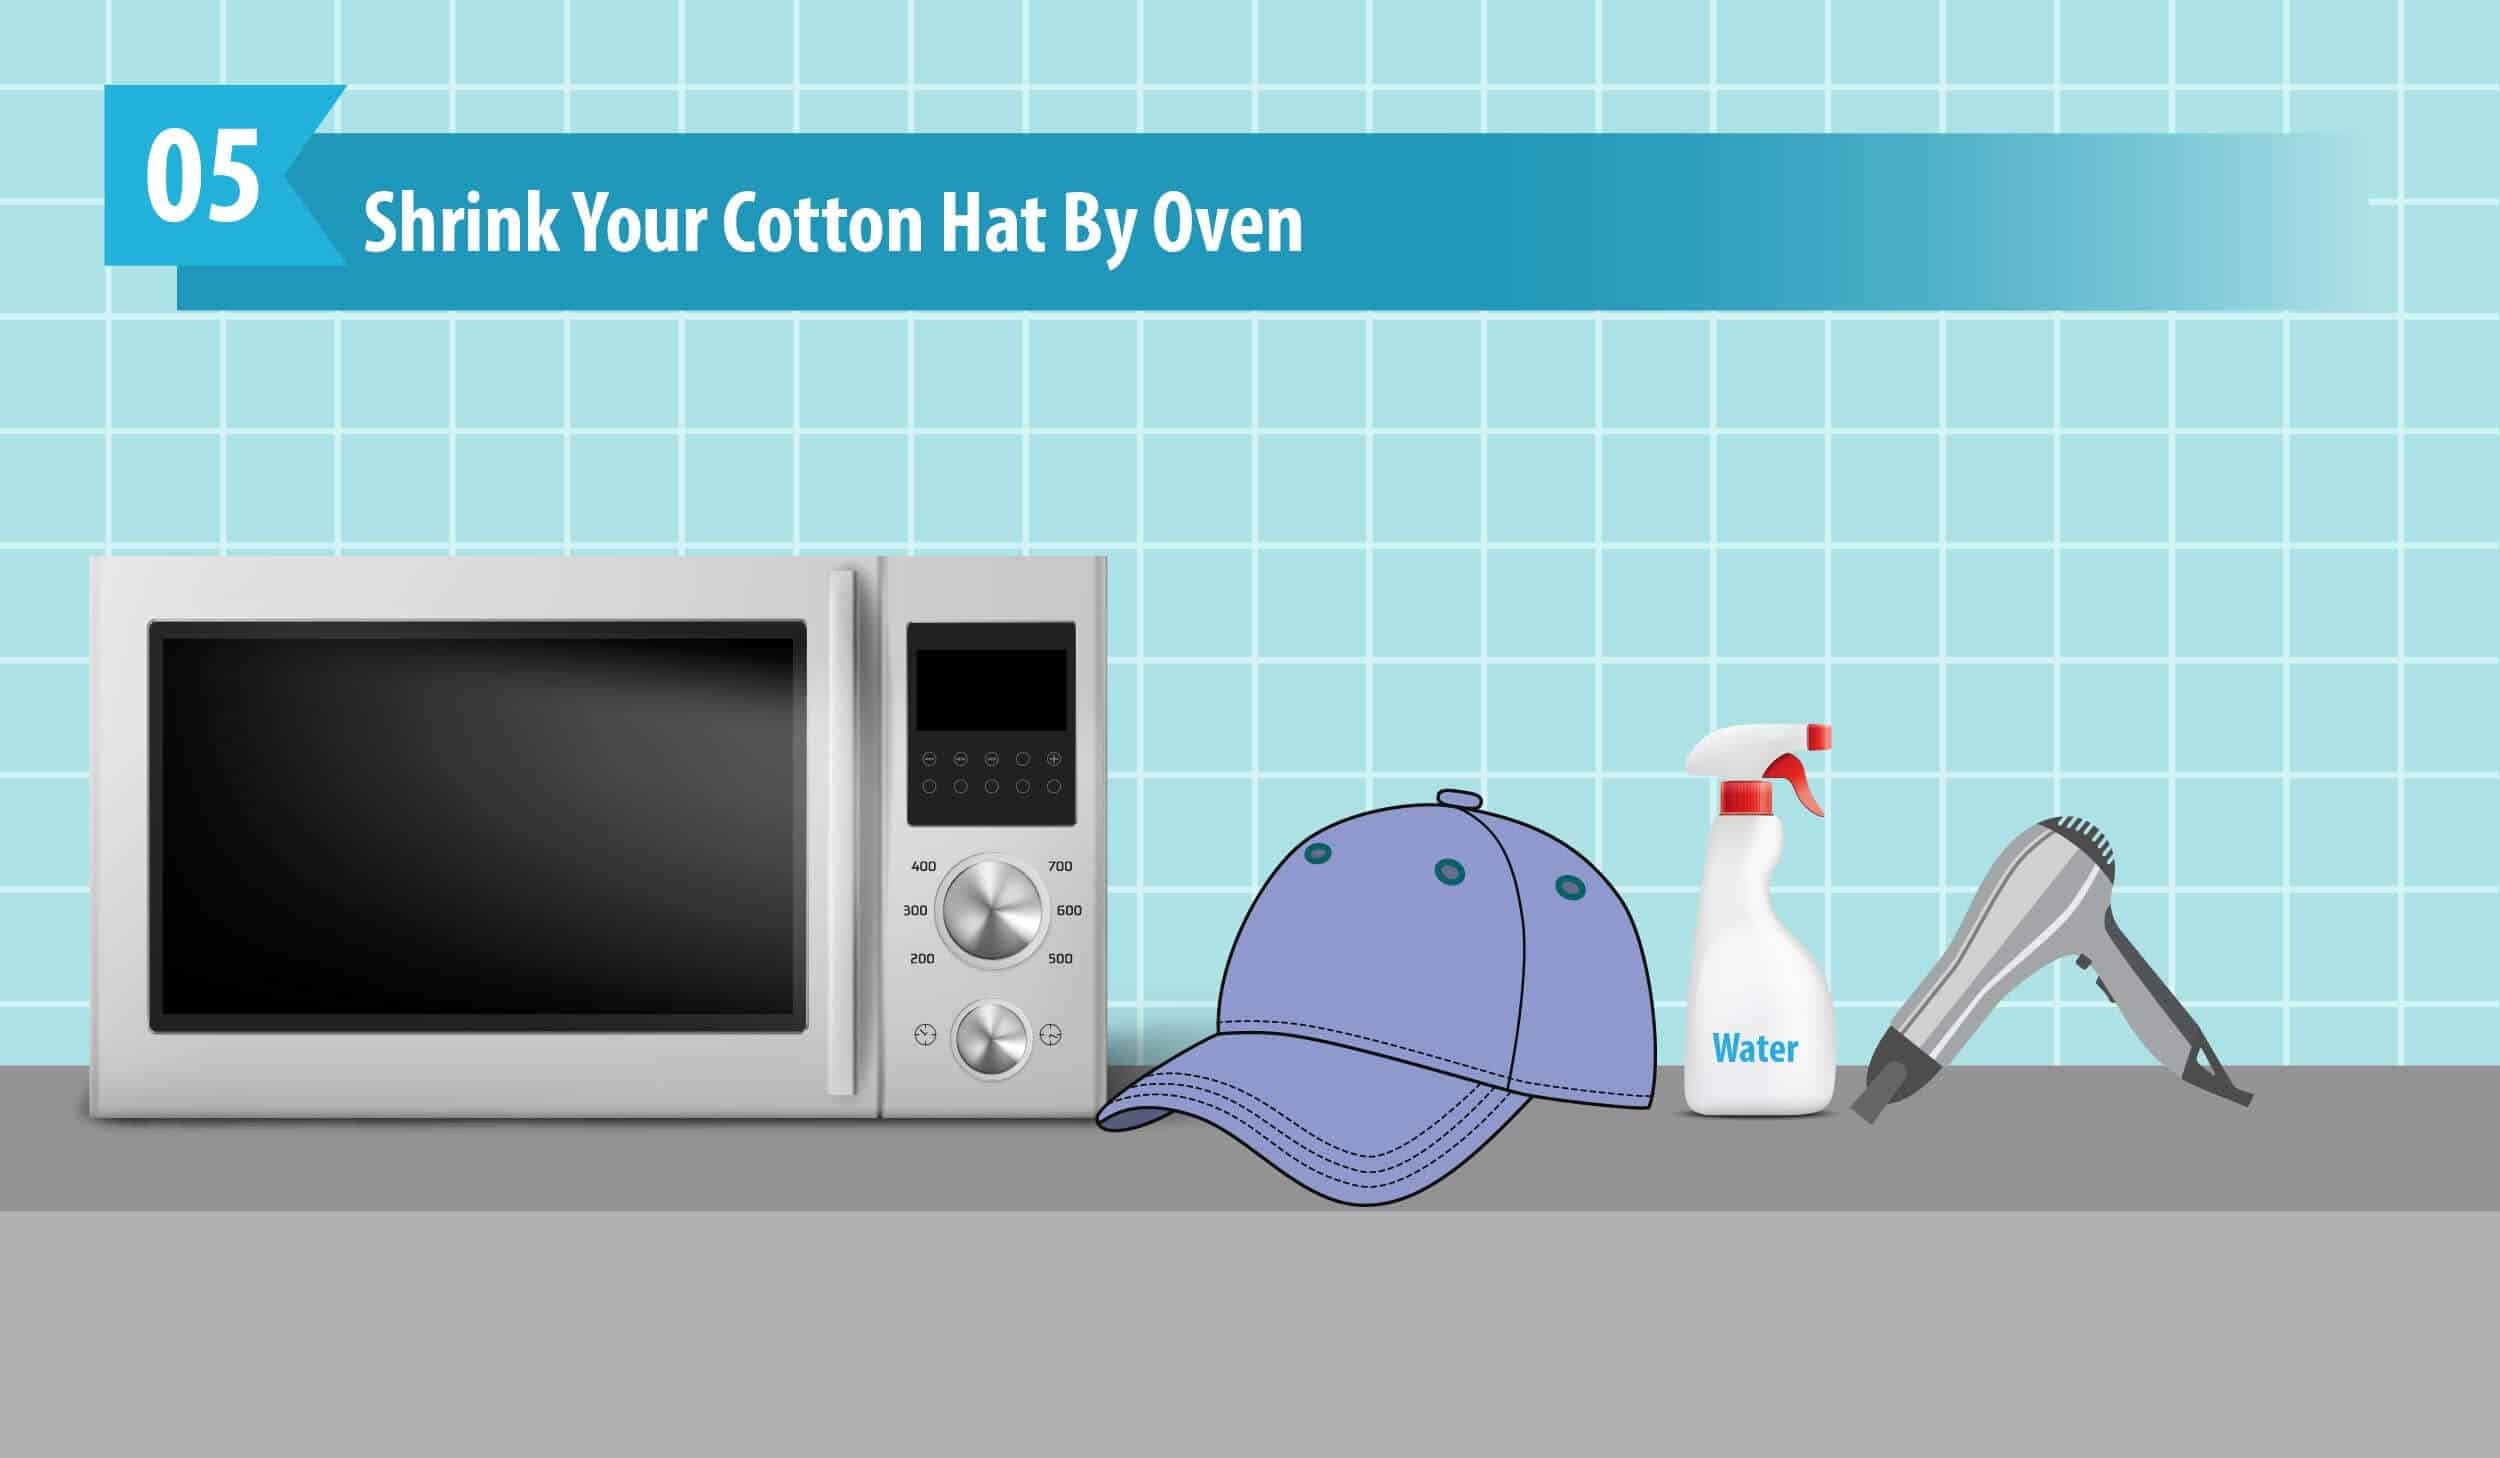 Shrink Your Cotton Hat By Oven